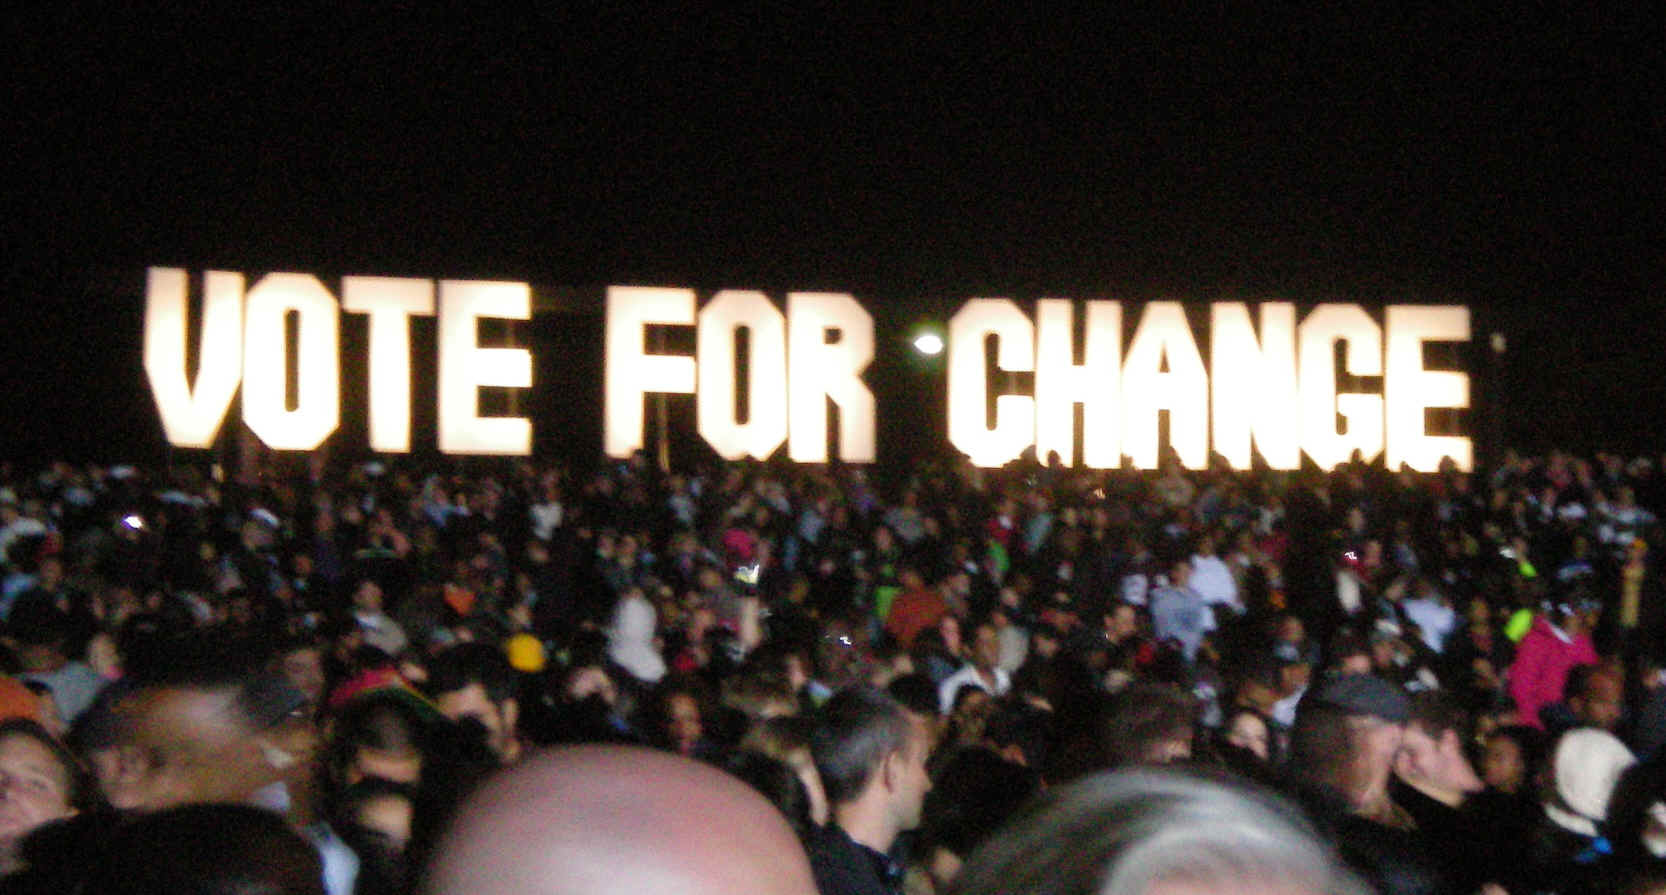 Image: Sign stating "Vote for Change" and Obama rally crowd